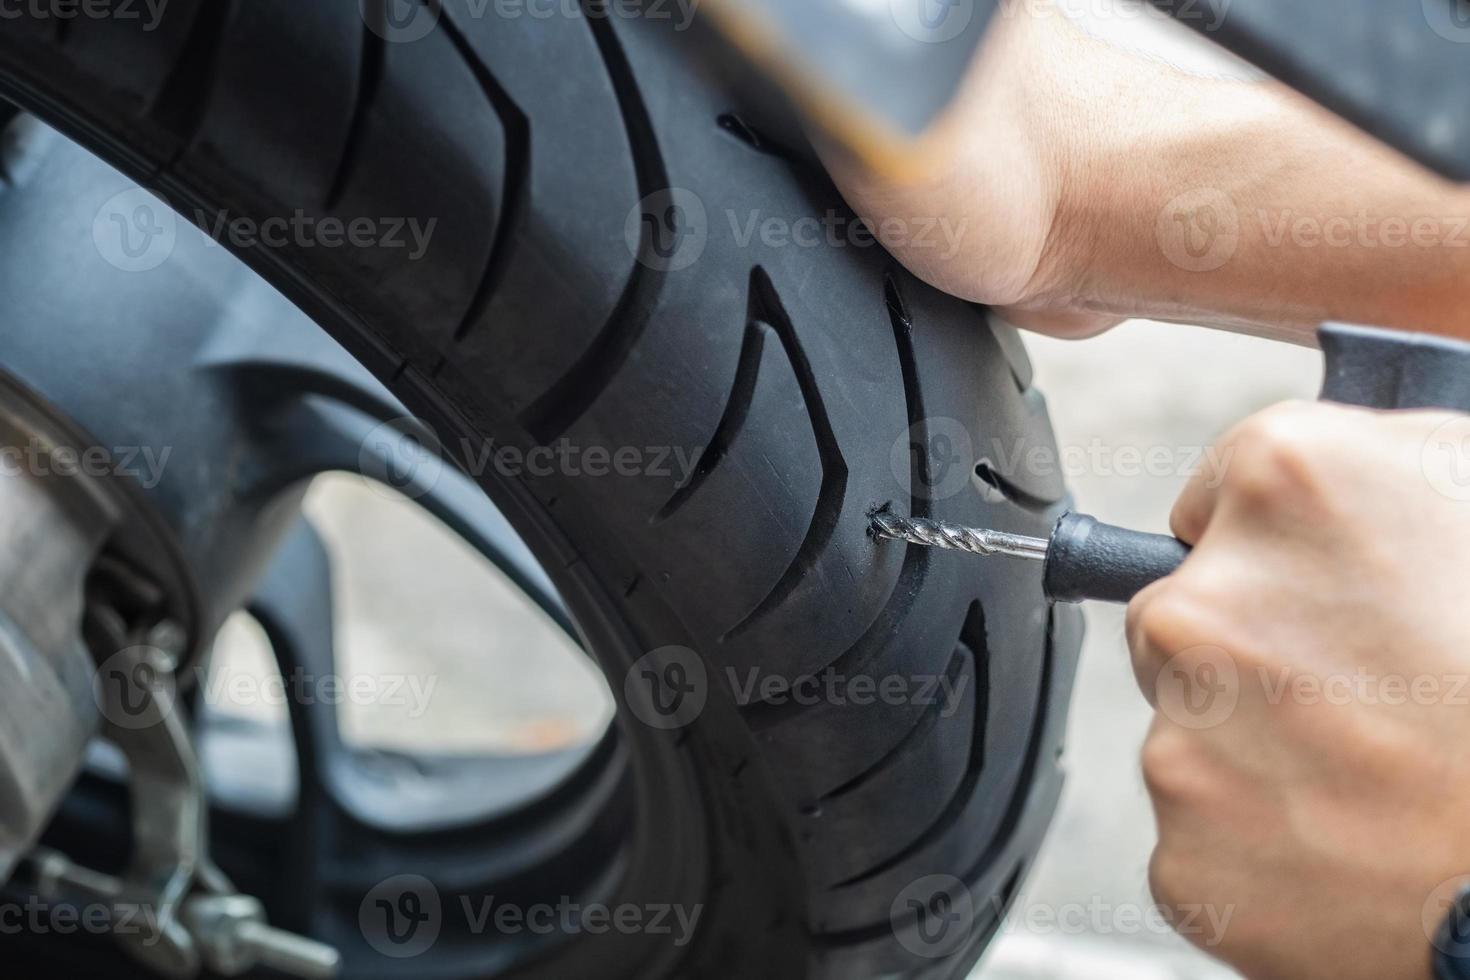 Rider use a tire plug kit and trying to fix a hole in tire's sidewall ,Repair a motorcycle flat tire in the garage. motorcycle maintenance and repair concept photo